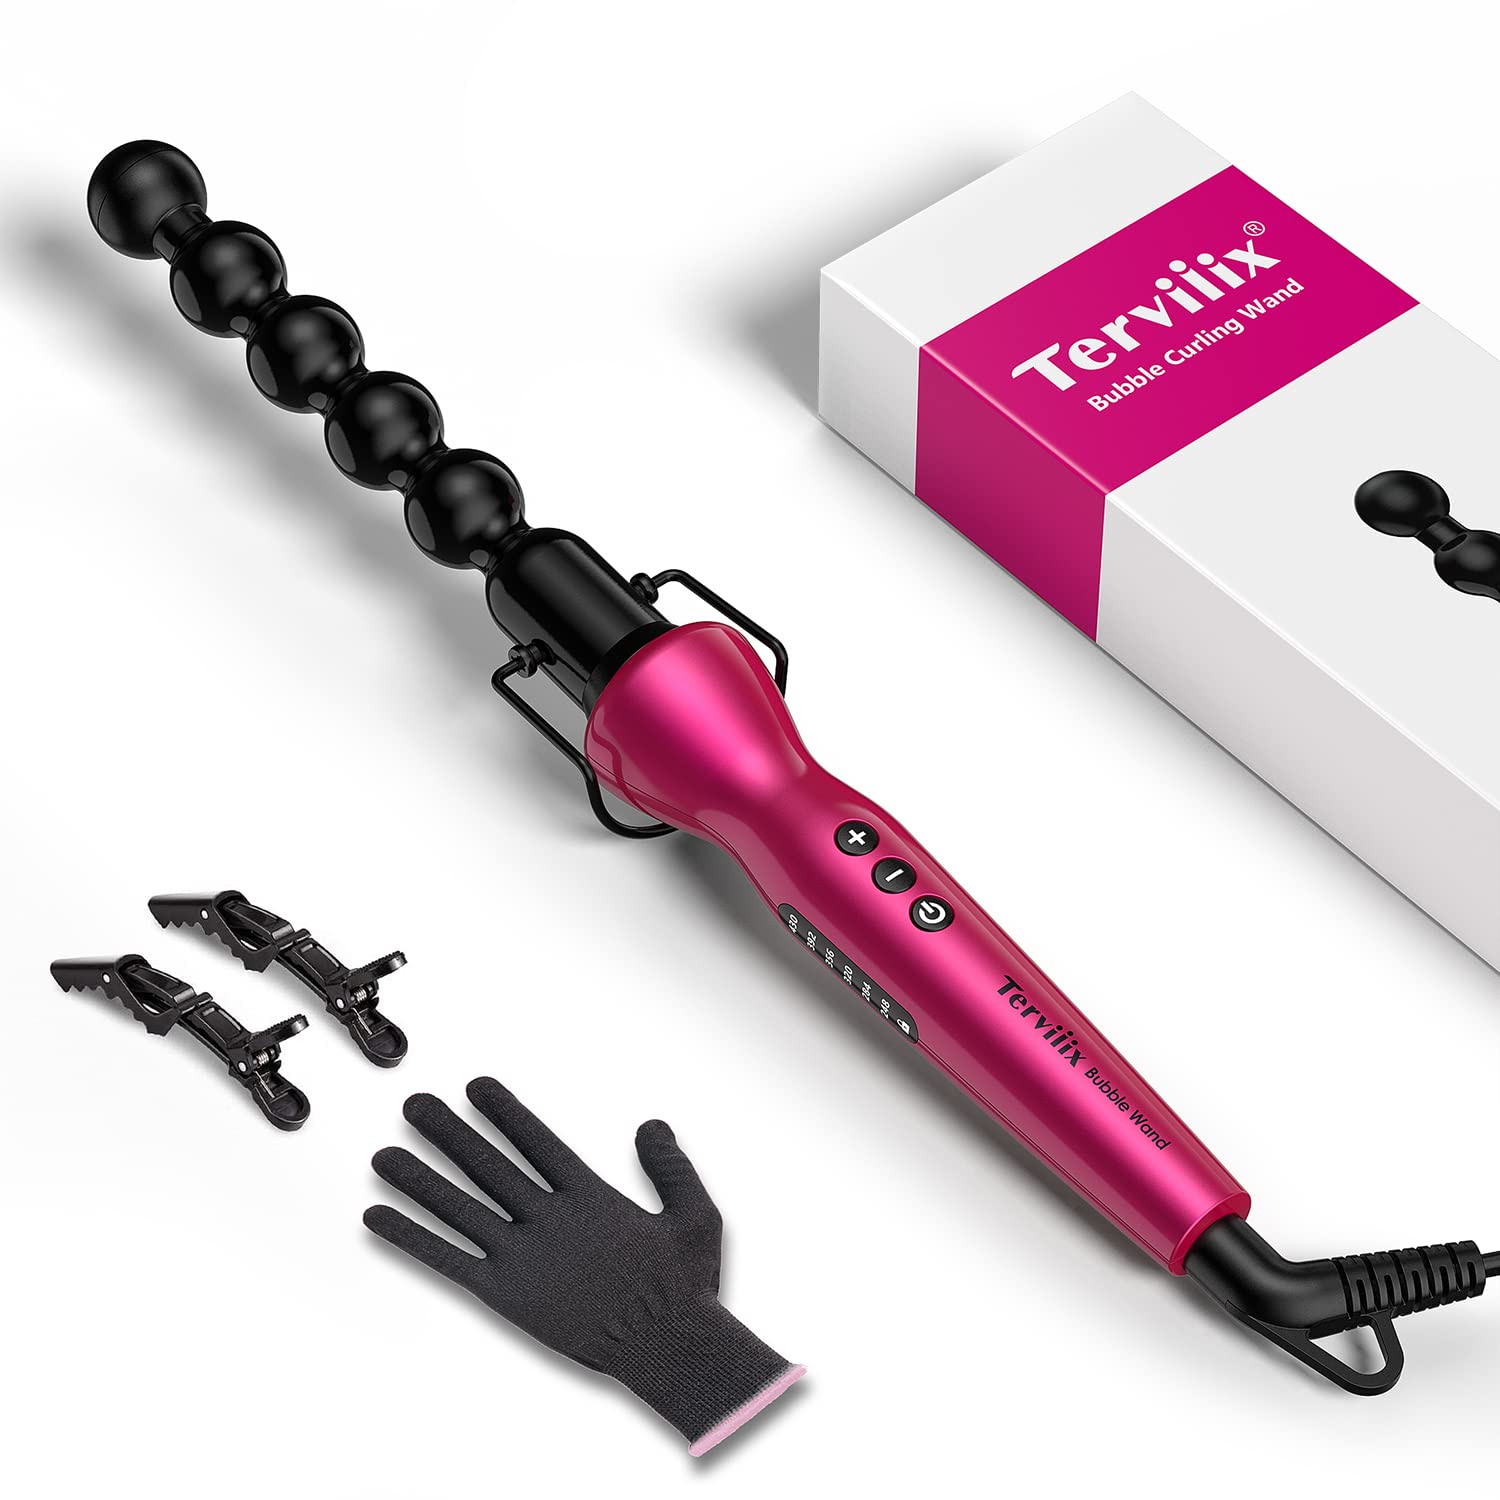 Amazon.com: Wavytalk Bubble Wand Curling Iron, Ceramic 1 Inch Bubble  Curling Wand for Short & Long Hair, Spiral, with Adjustable Temp, Dual  Voltage, Include Heat Resistant Glove : Beauty & Personal Care